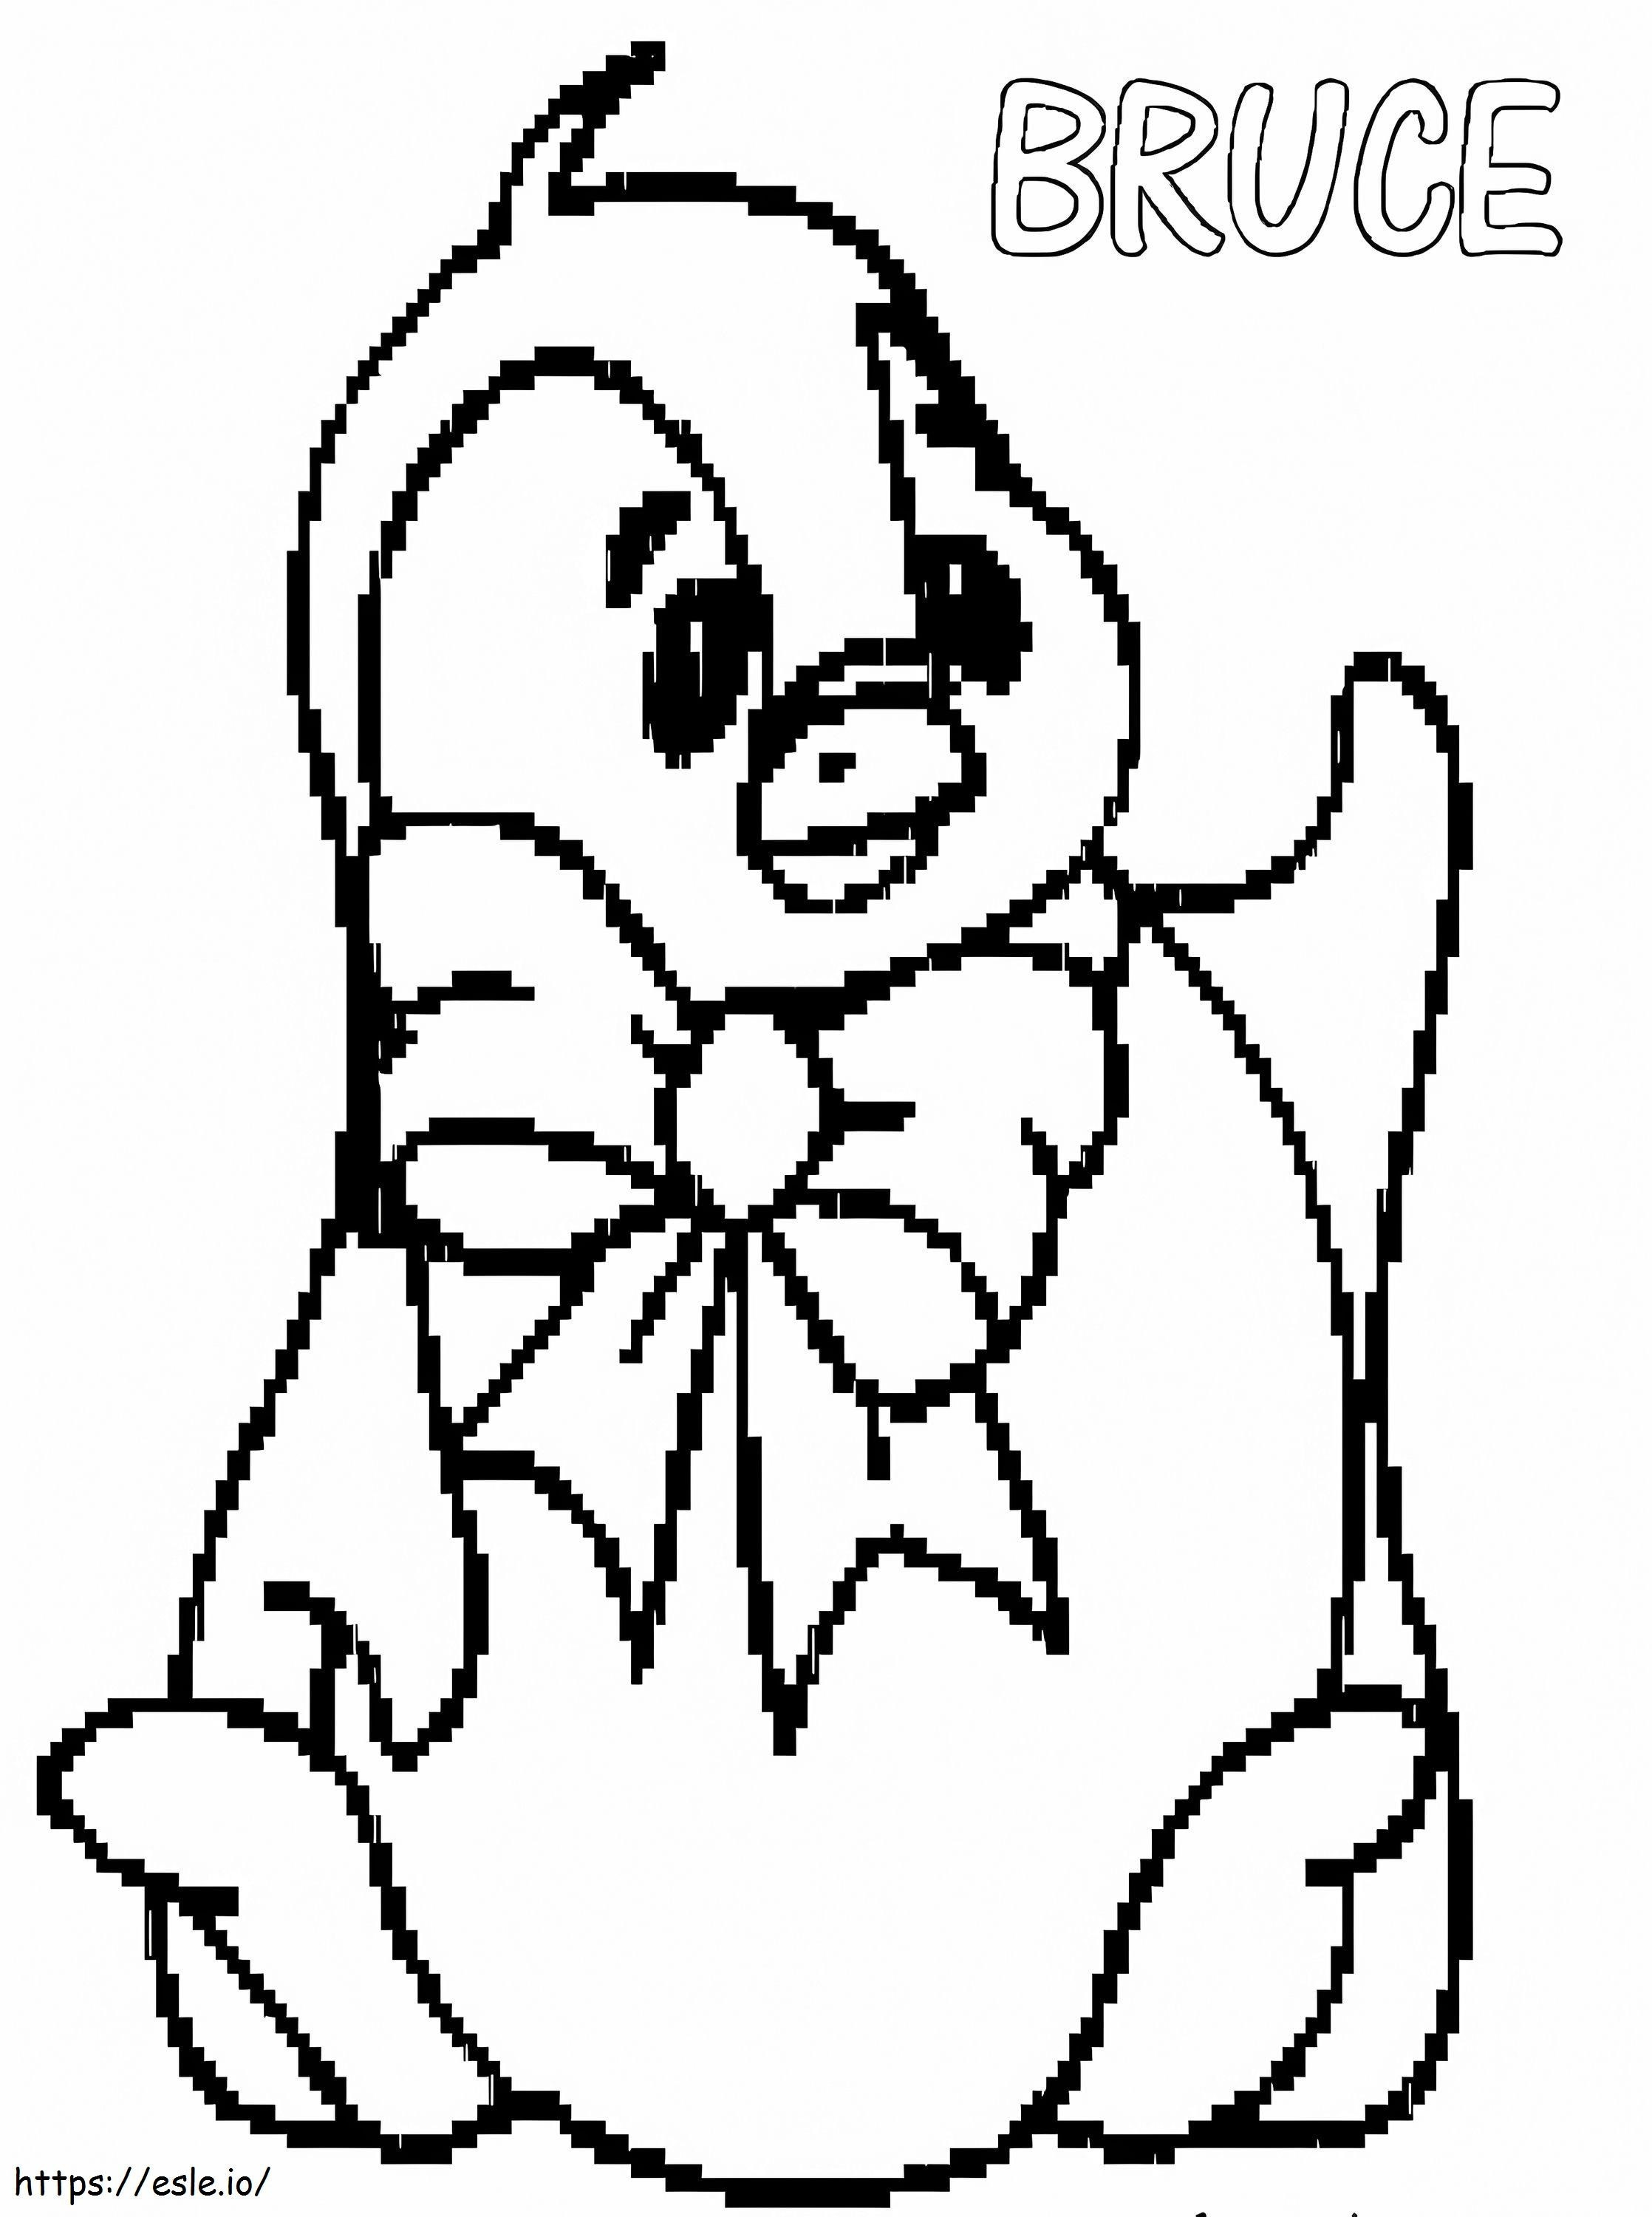 Neopets Bruce coloring page